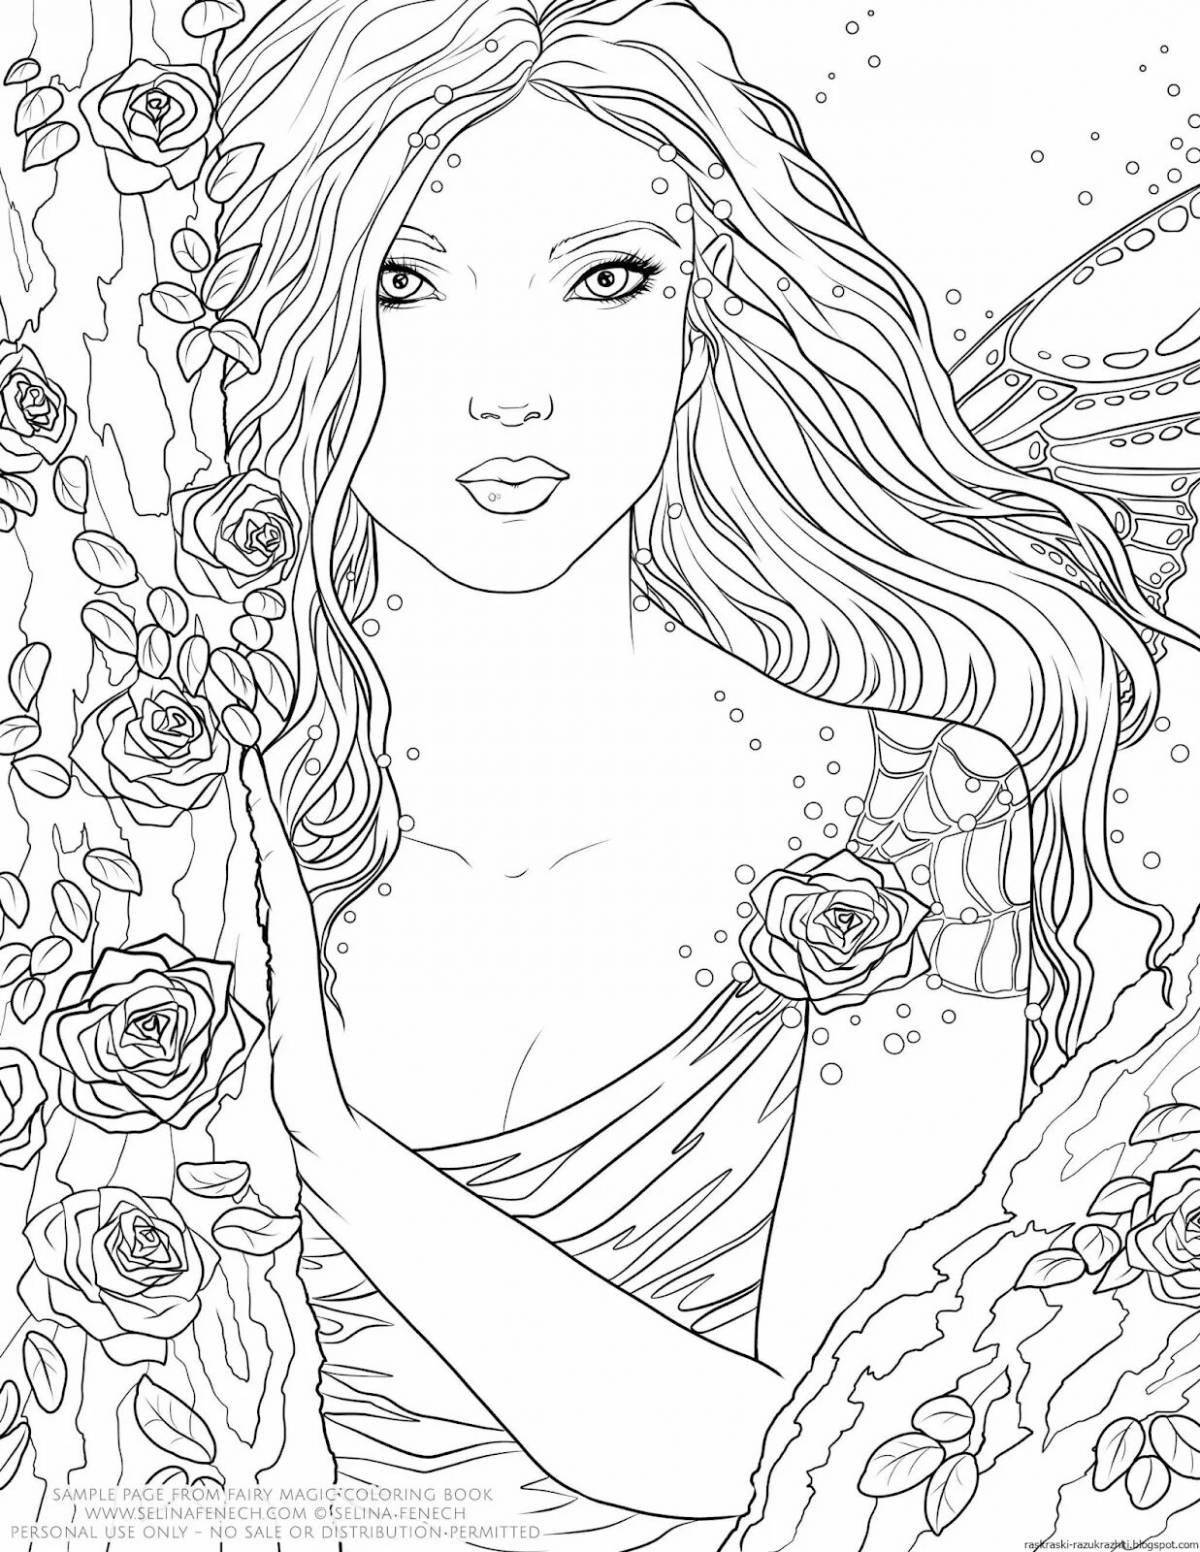 Blissful anti-stress coloring book